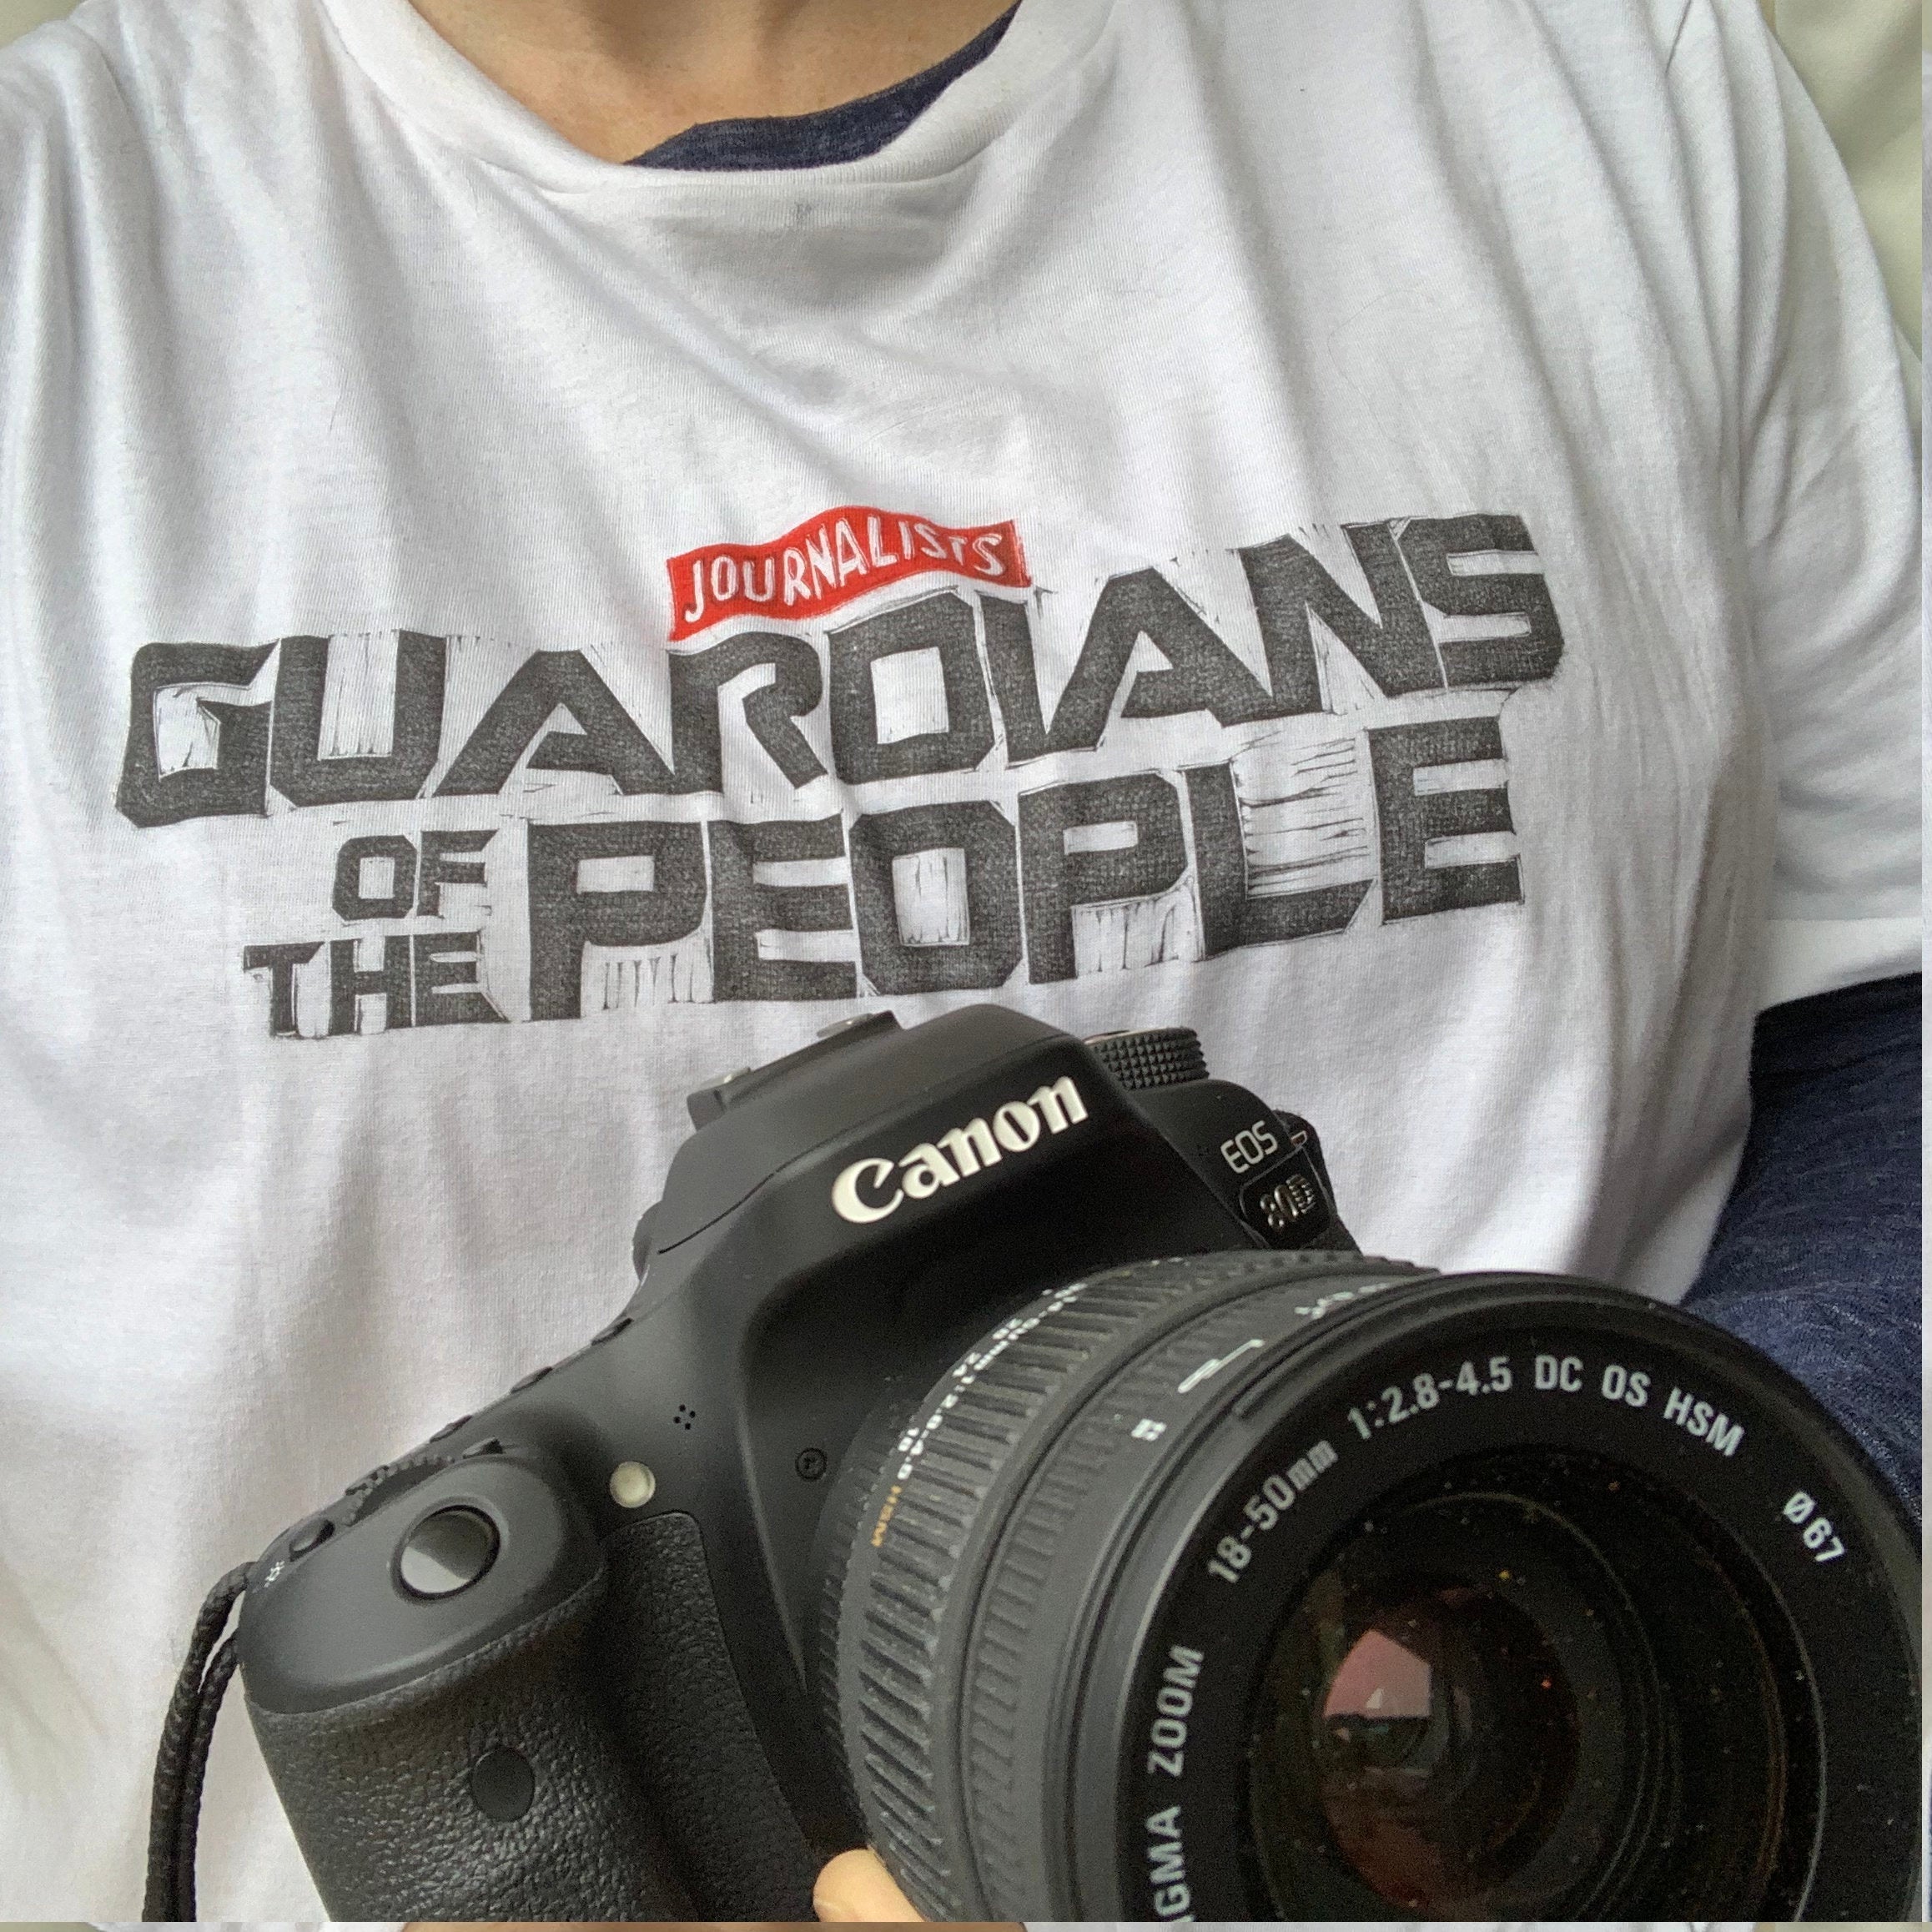 Sale! Journalists: Guardians of the People handprinted t-shirt